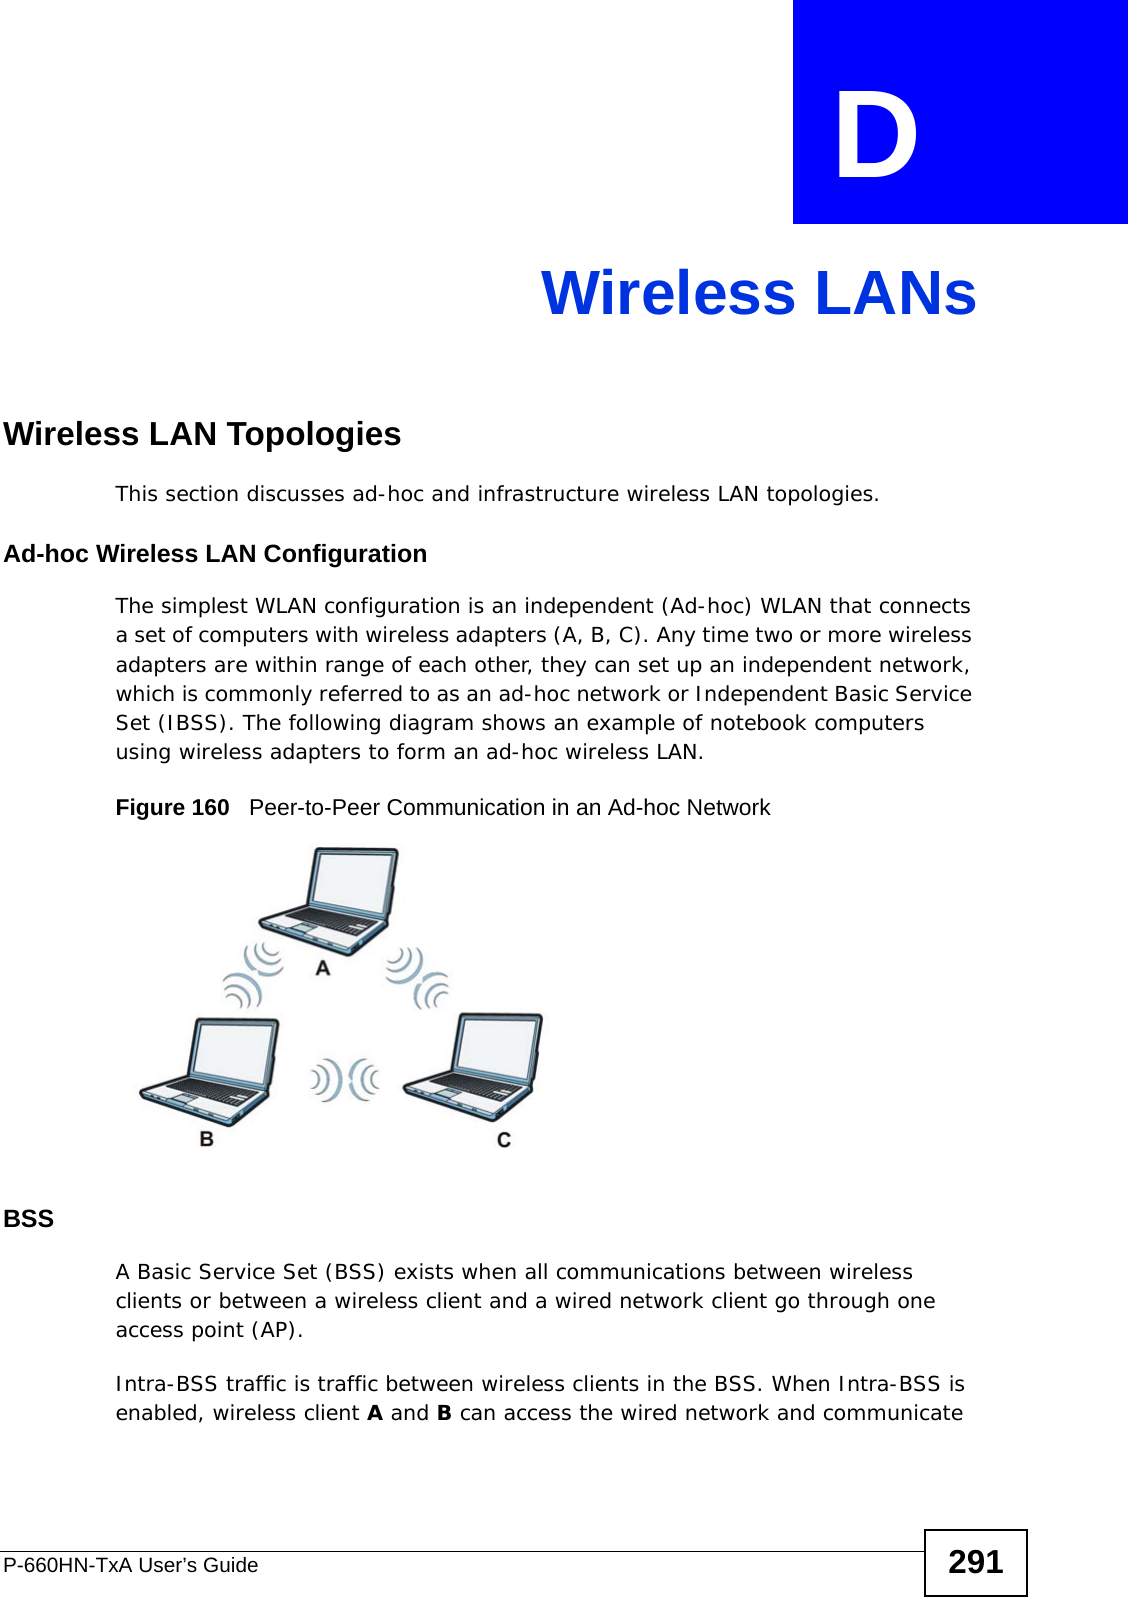 P-660HN-TxA User’s Guide 291APPENDIX  D Wireless LANsWireless LAN TopologiesThis section discusses ad-hoc and infrastructure wireless LAN topologies.Ad-hoc Wireless LAN ConfigurationThe simplest WLAN configuration is an independent (Ad-hoc) WLAN that connects a set of computers with wireless adapters (A, B, C). Any time two or more wireless adapters are within range of each other, they can set up an independent network, which is commonly referred to as an ad-hoc network or Independent Basic Service Set (IBSS). The following diagram shows an example of notebook computers using wireless adapters to form an ad-hoc wireless LAN. Figure 160   Peer-to-Peer Communication in an Ad-hoc NetworkBSSA Basic Service Set (BSS) exists when all communications between wireless clients or between a wireless client and a wired network client go through one access point (AP). Intra-BSS traffic is traffic between wireless clients in the BSS. When Intra-BSS is enabled, wireless client A and B can access the wired network and communicate 